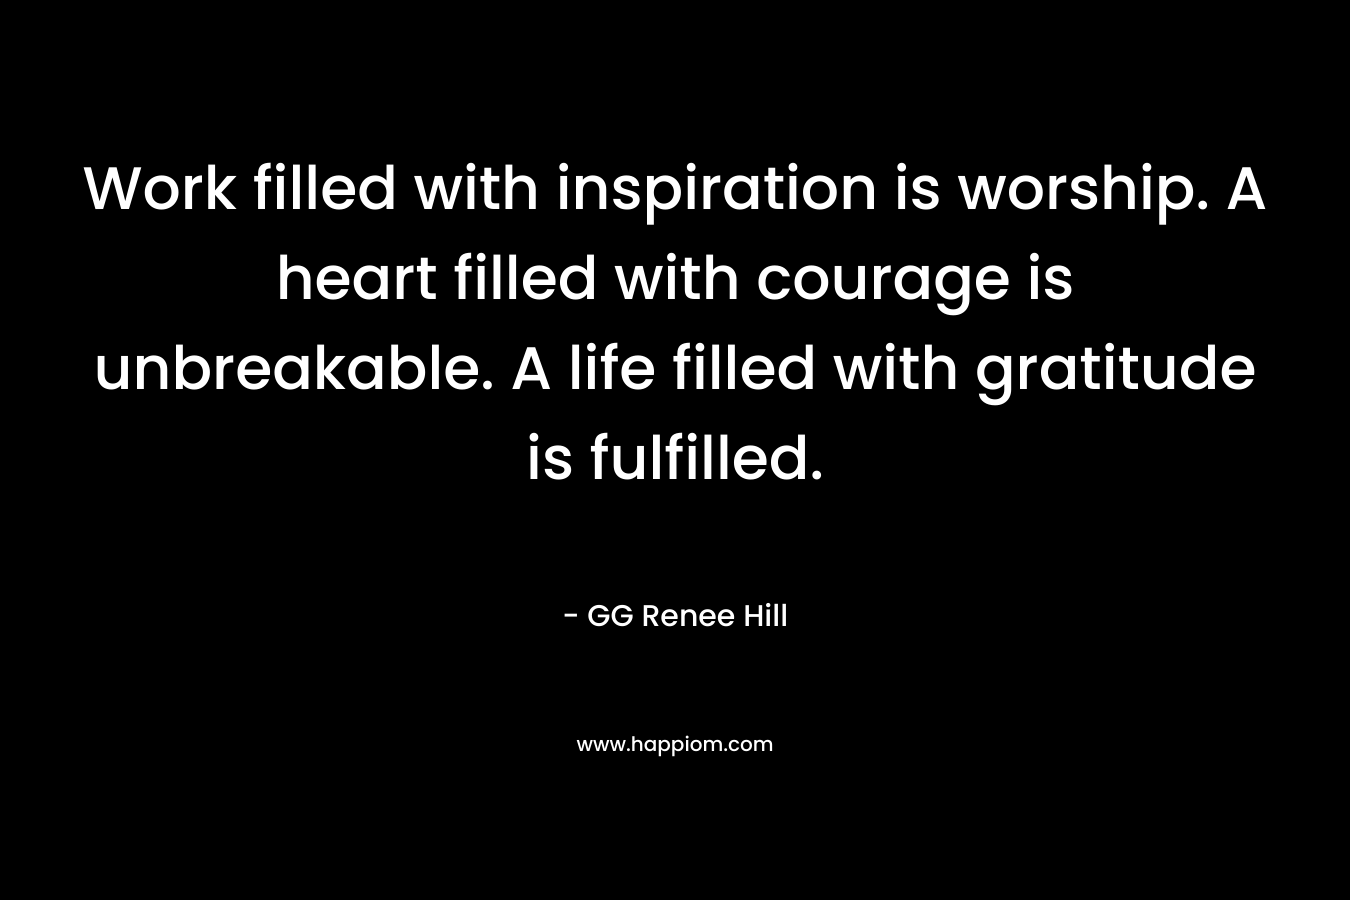 Work filled with inspiration is worship. A heart filled with courage is unbreakable. A life filled with gratitude is fulfilled.